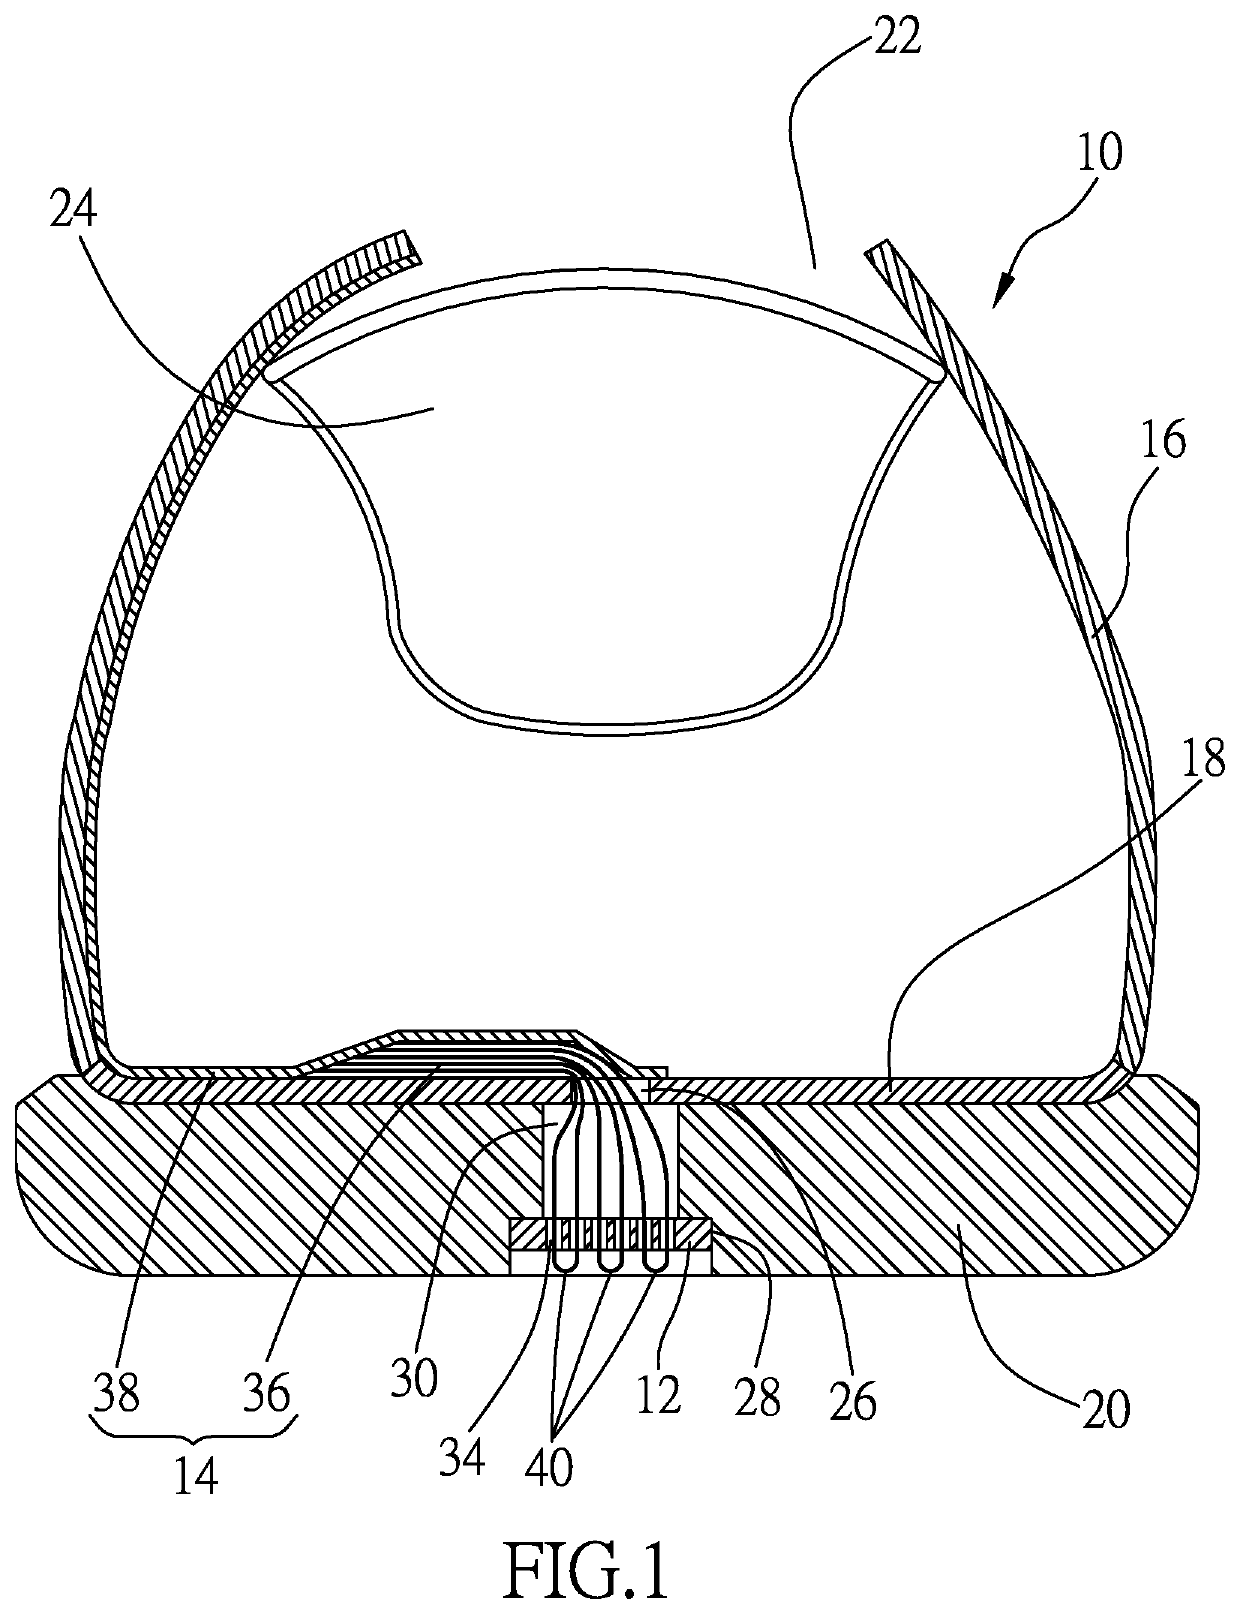 Electrically conductive shoe